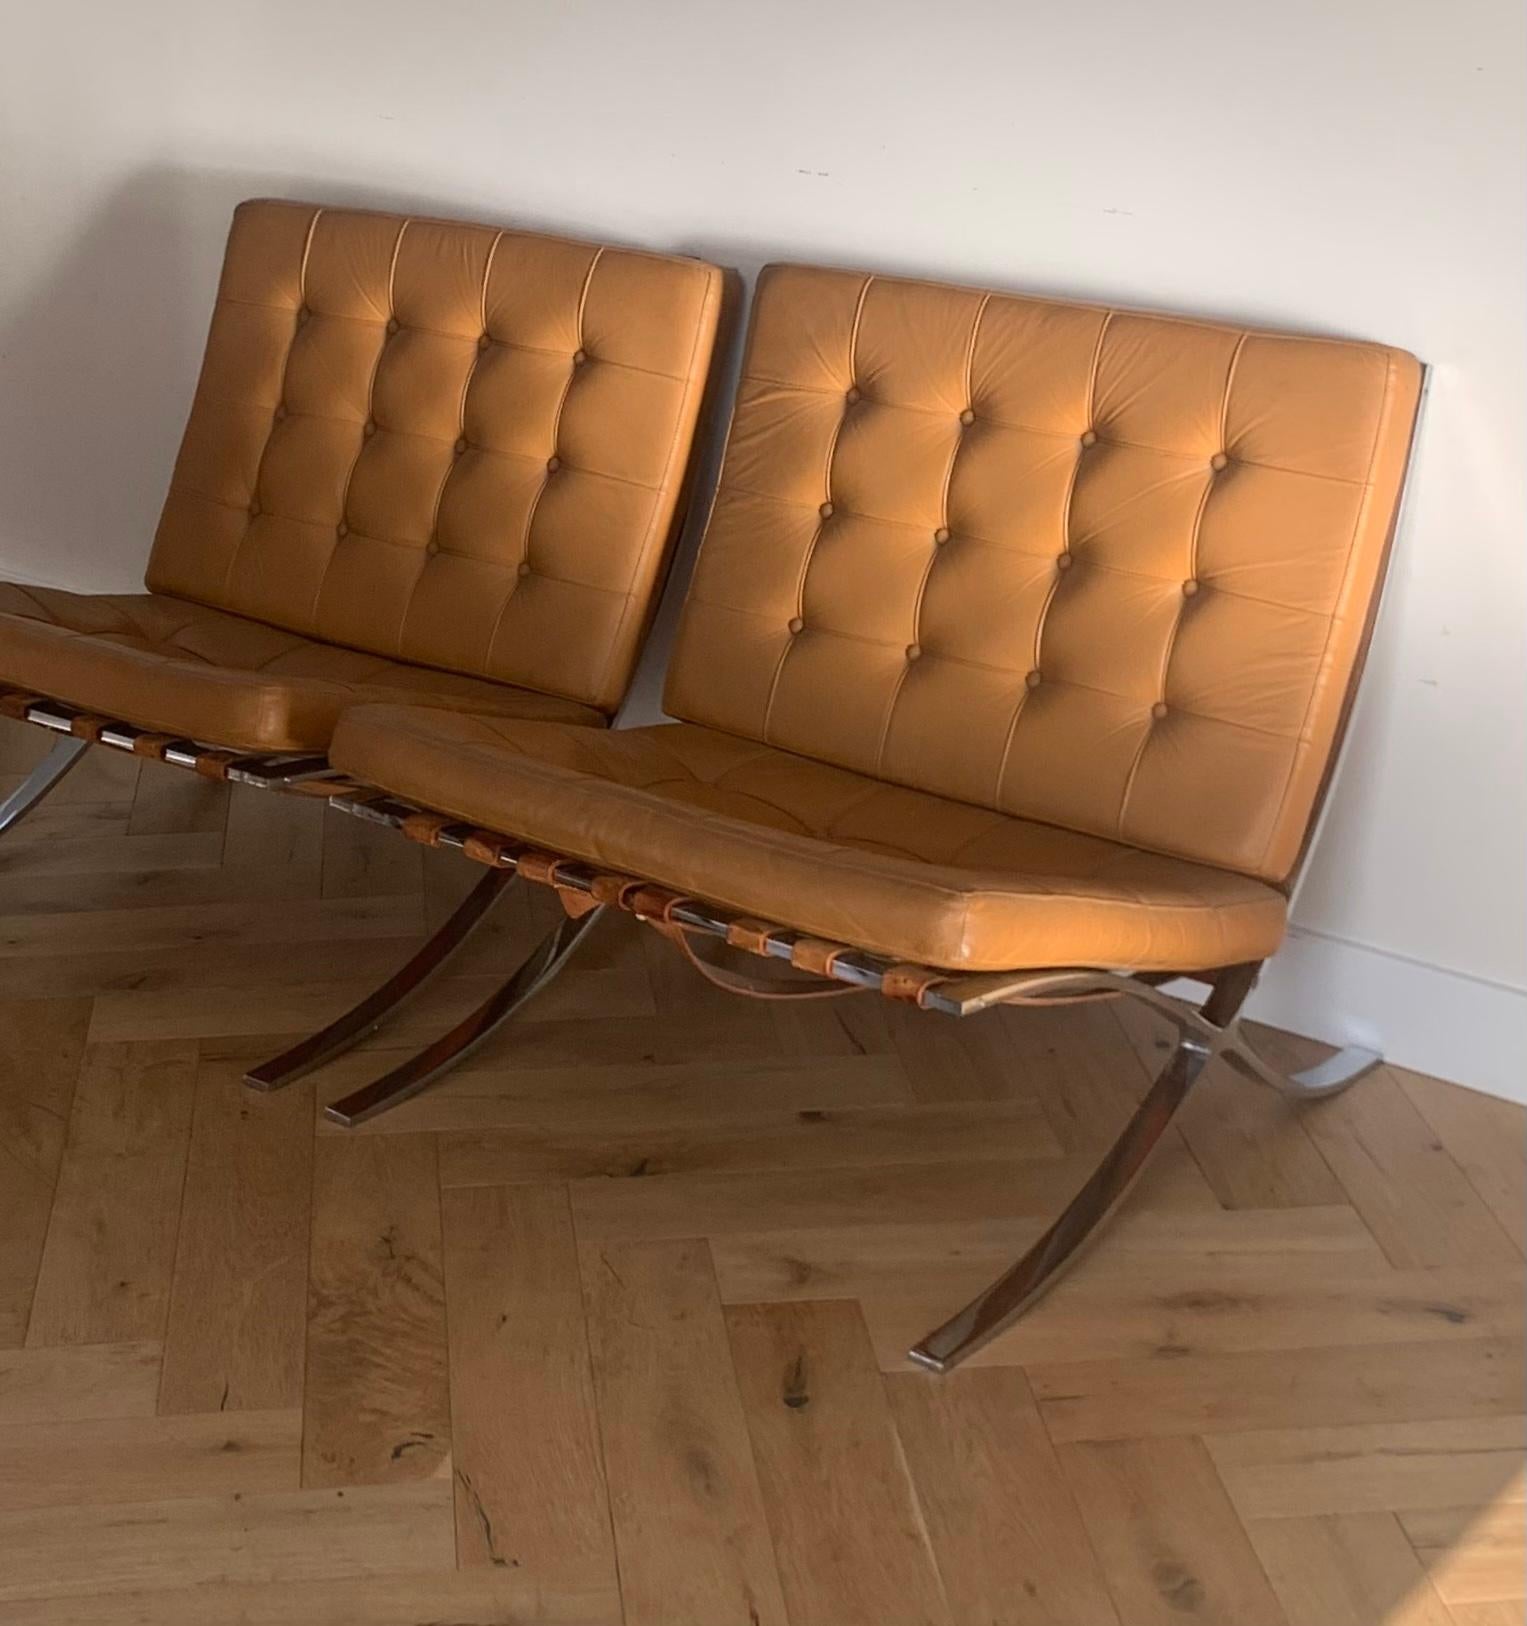 A pair of Mies van der Rohe Barcelona chairs in cognac. These are 1960s reproduction of the 1929 original design, discerned by the steel frame, real leather belting, and the vintage screws. An iconic Bauhaus triumph which recalls the ancient folding